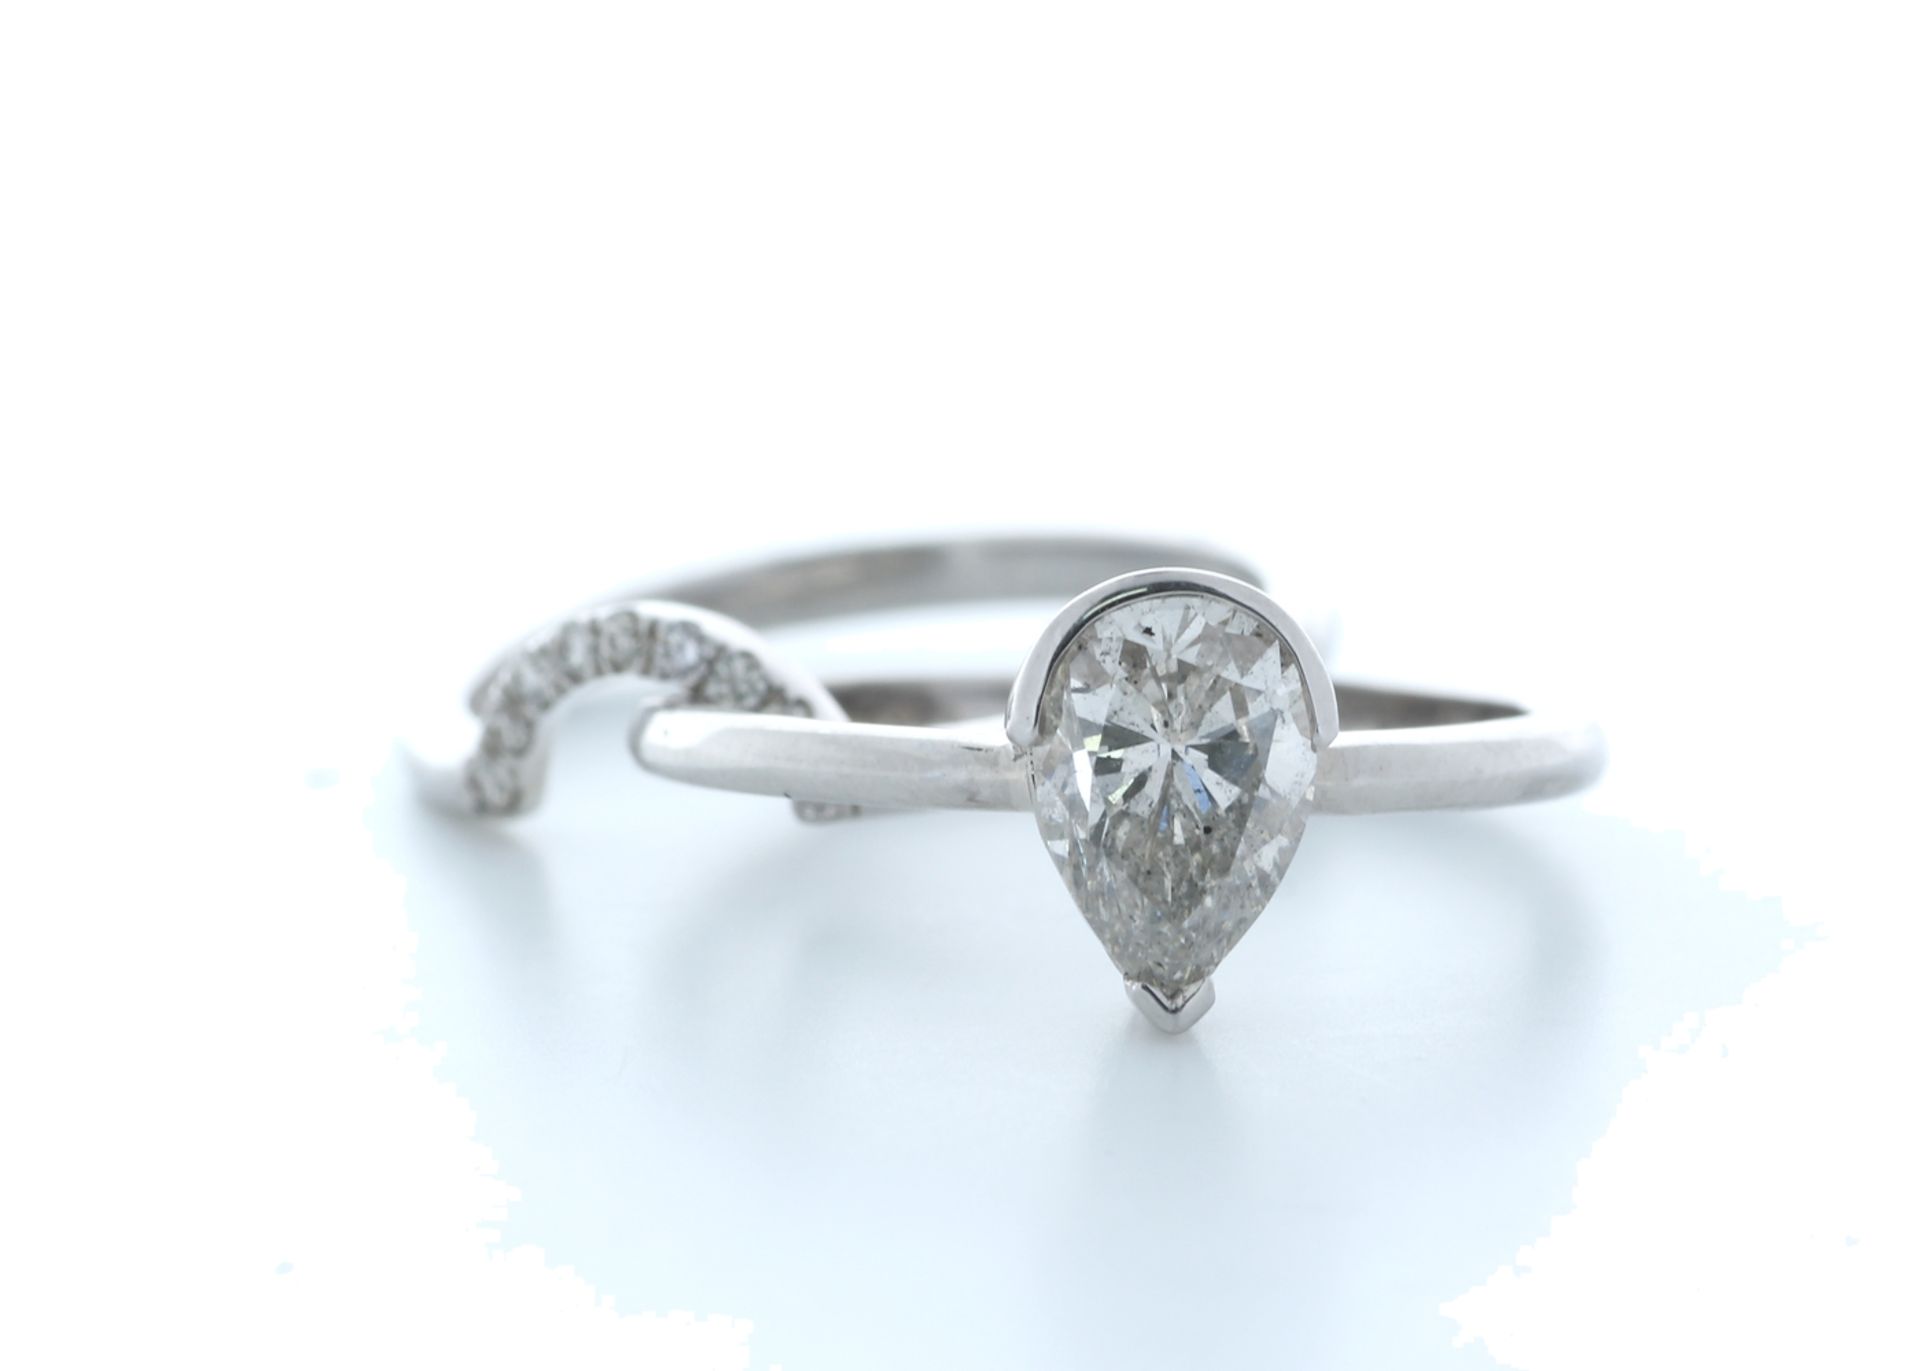 18ct White Gold Pear Shape Diamond Ring With Matching Band 1.16 (1.07) Carats - Valued by IDI £13, - Image 2 of 4